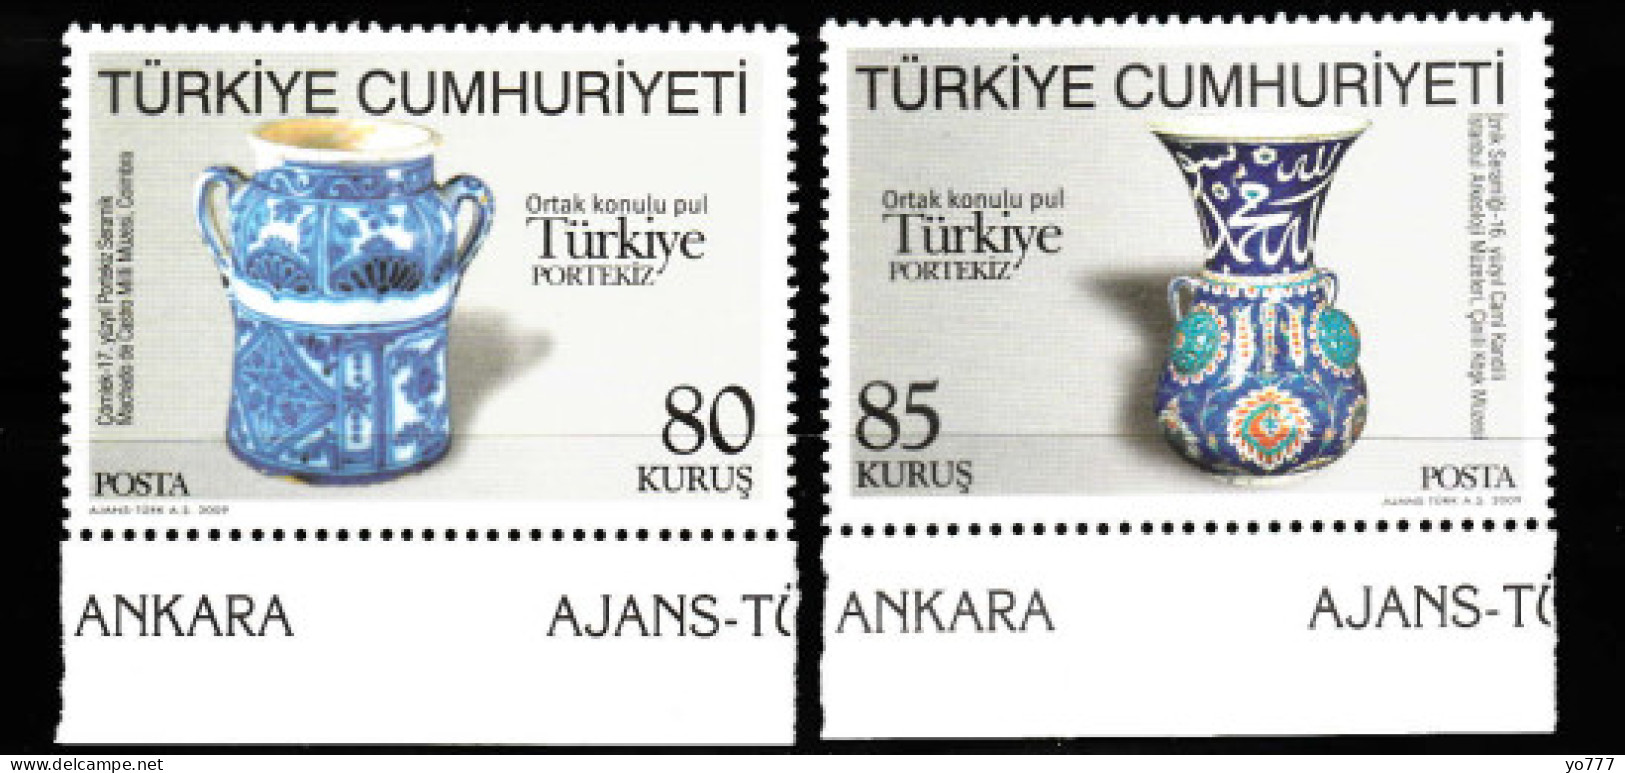 (3734-35) JOINT ISSUE OF STAMPS BETWEEN TURKEY-PORTUGAL MNH ** - Nuovi